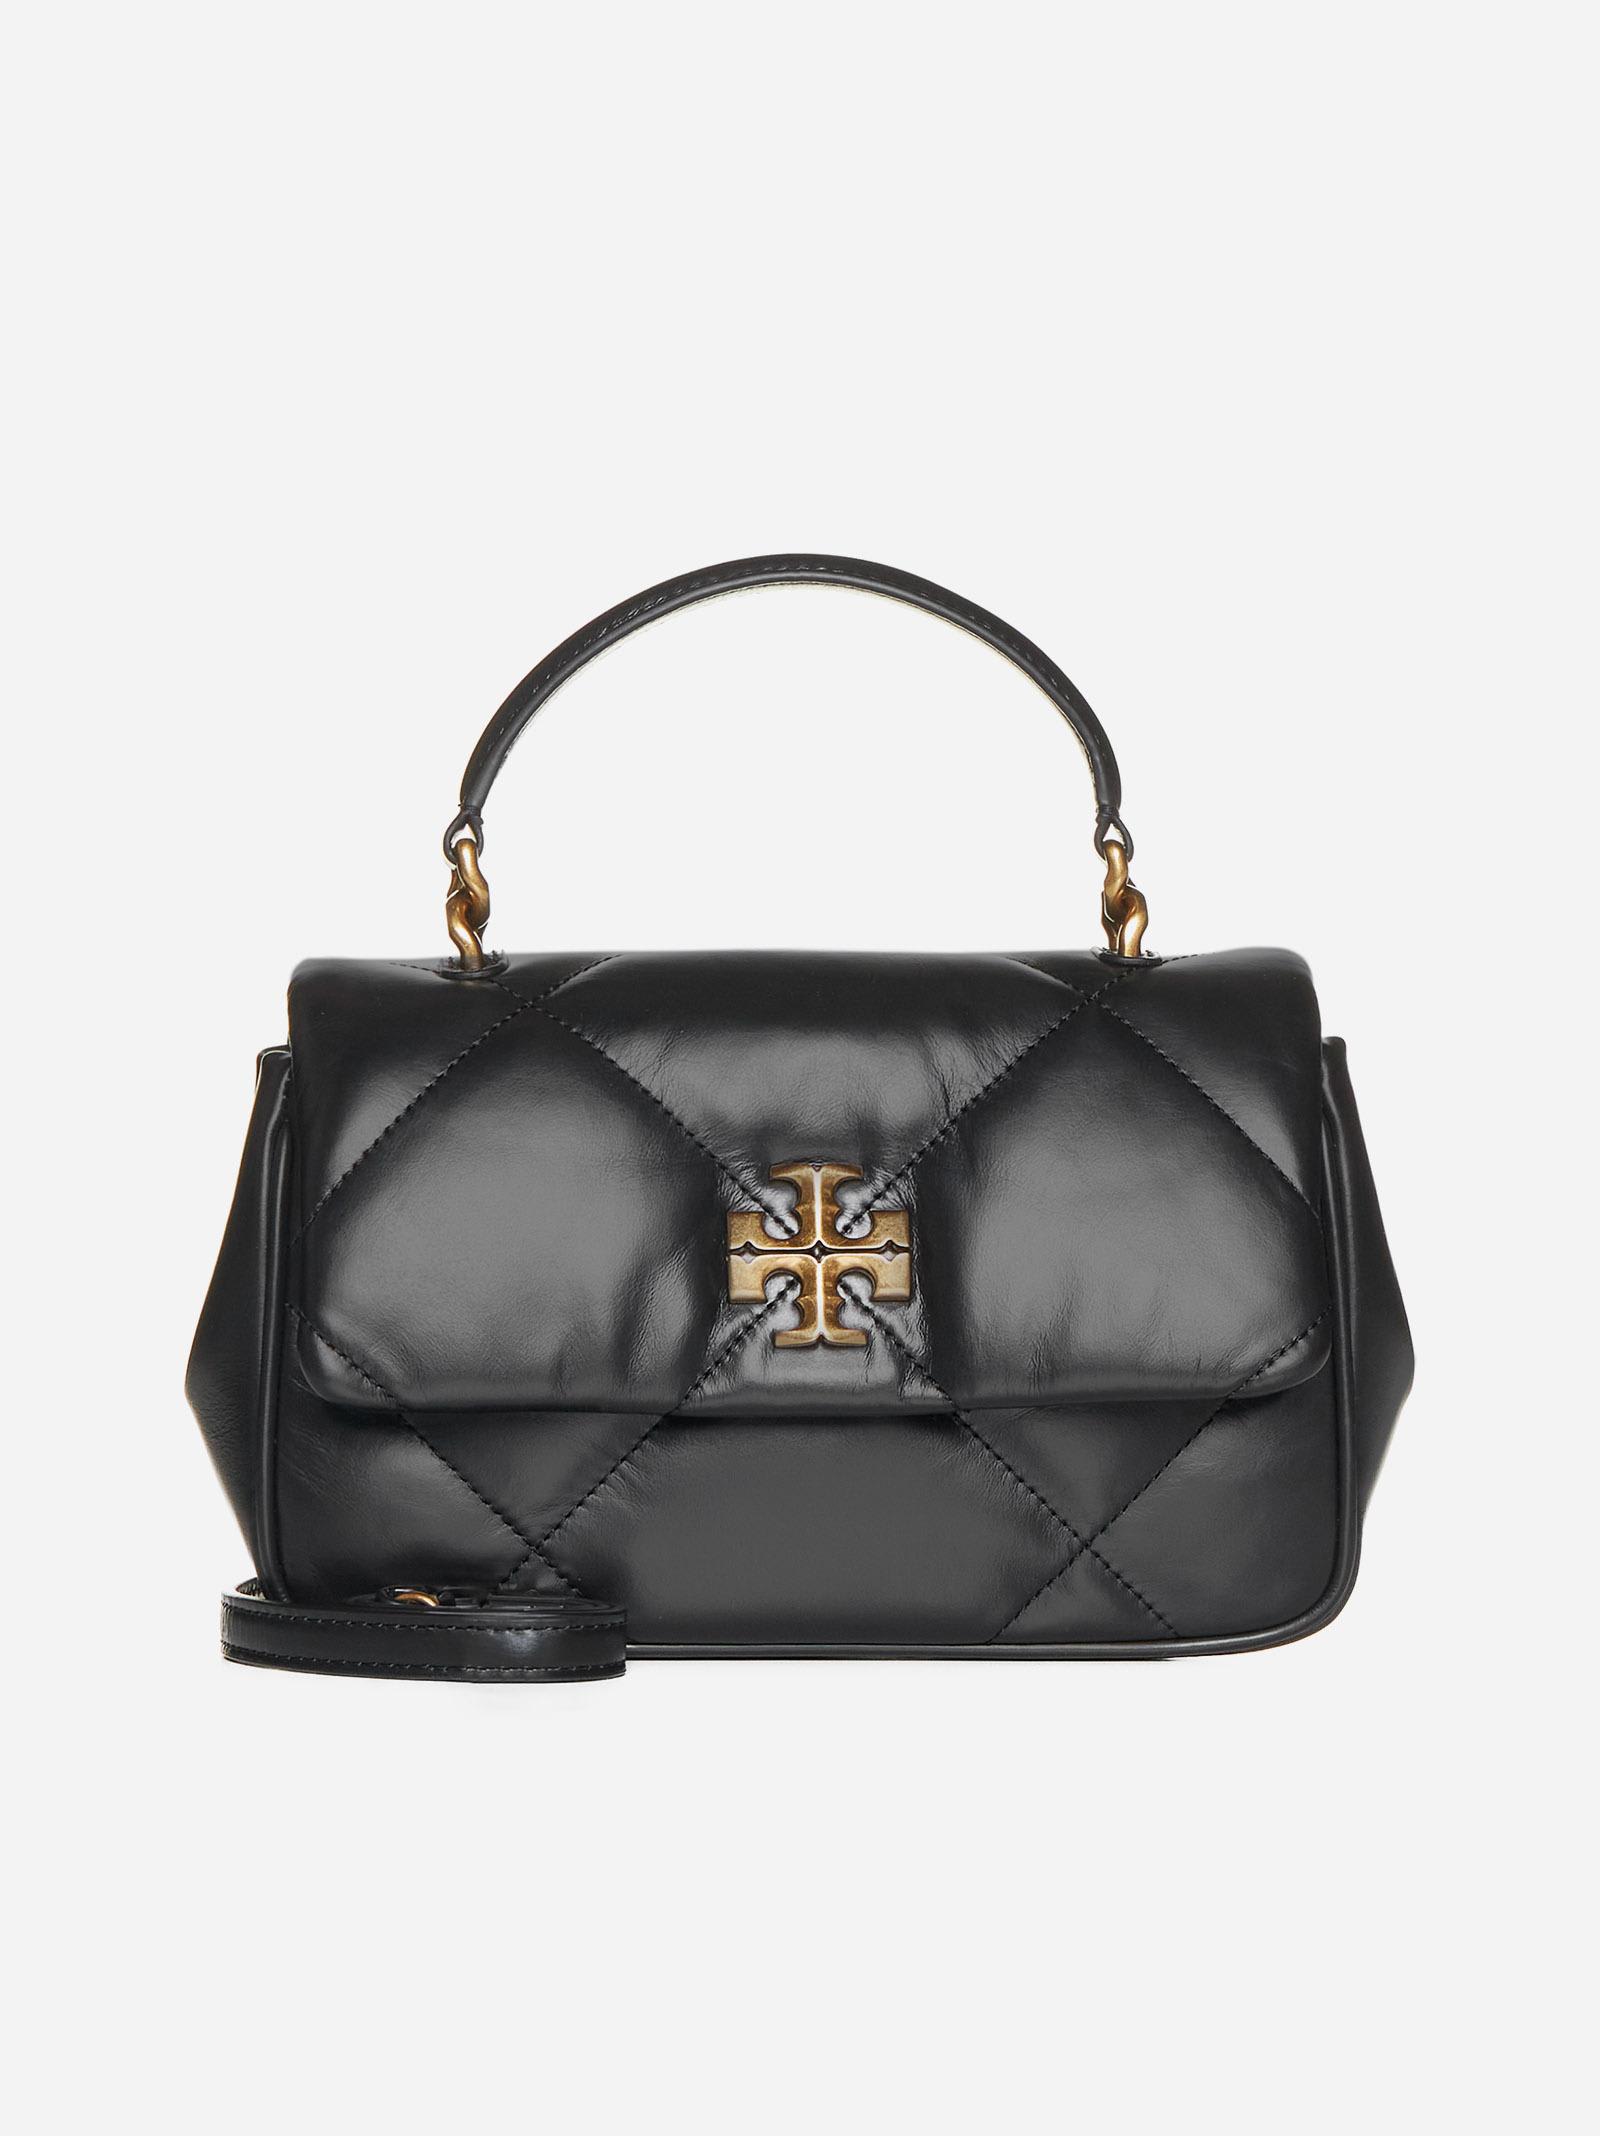 Tory Burch Kira Quilted Leather Bag In Black